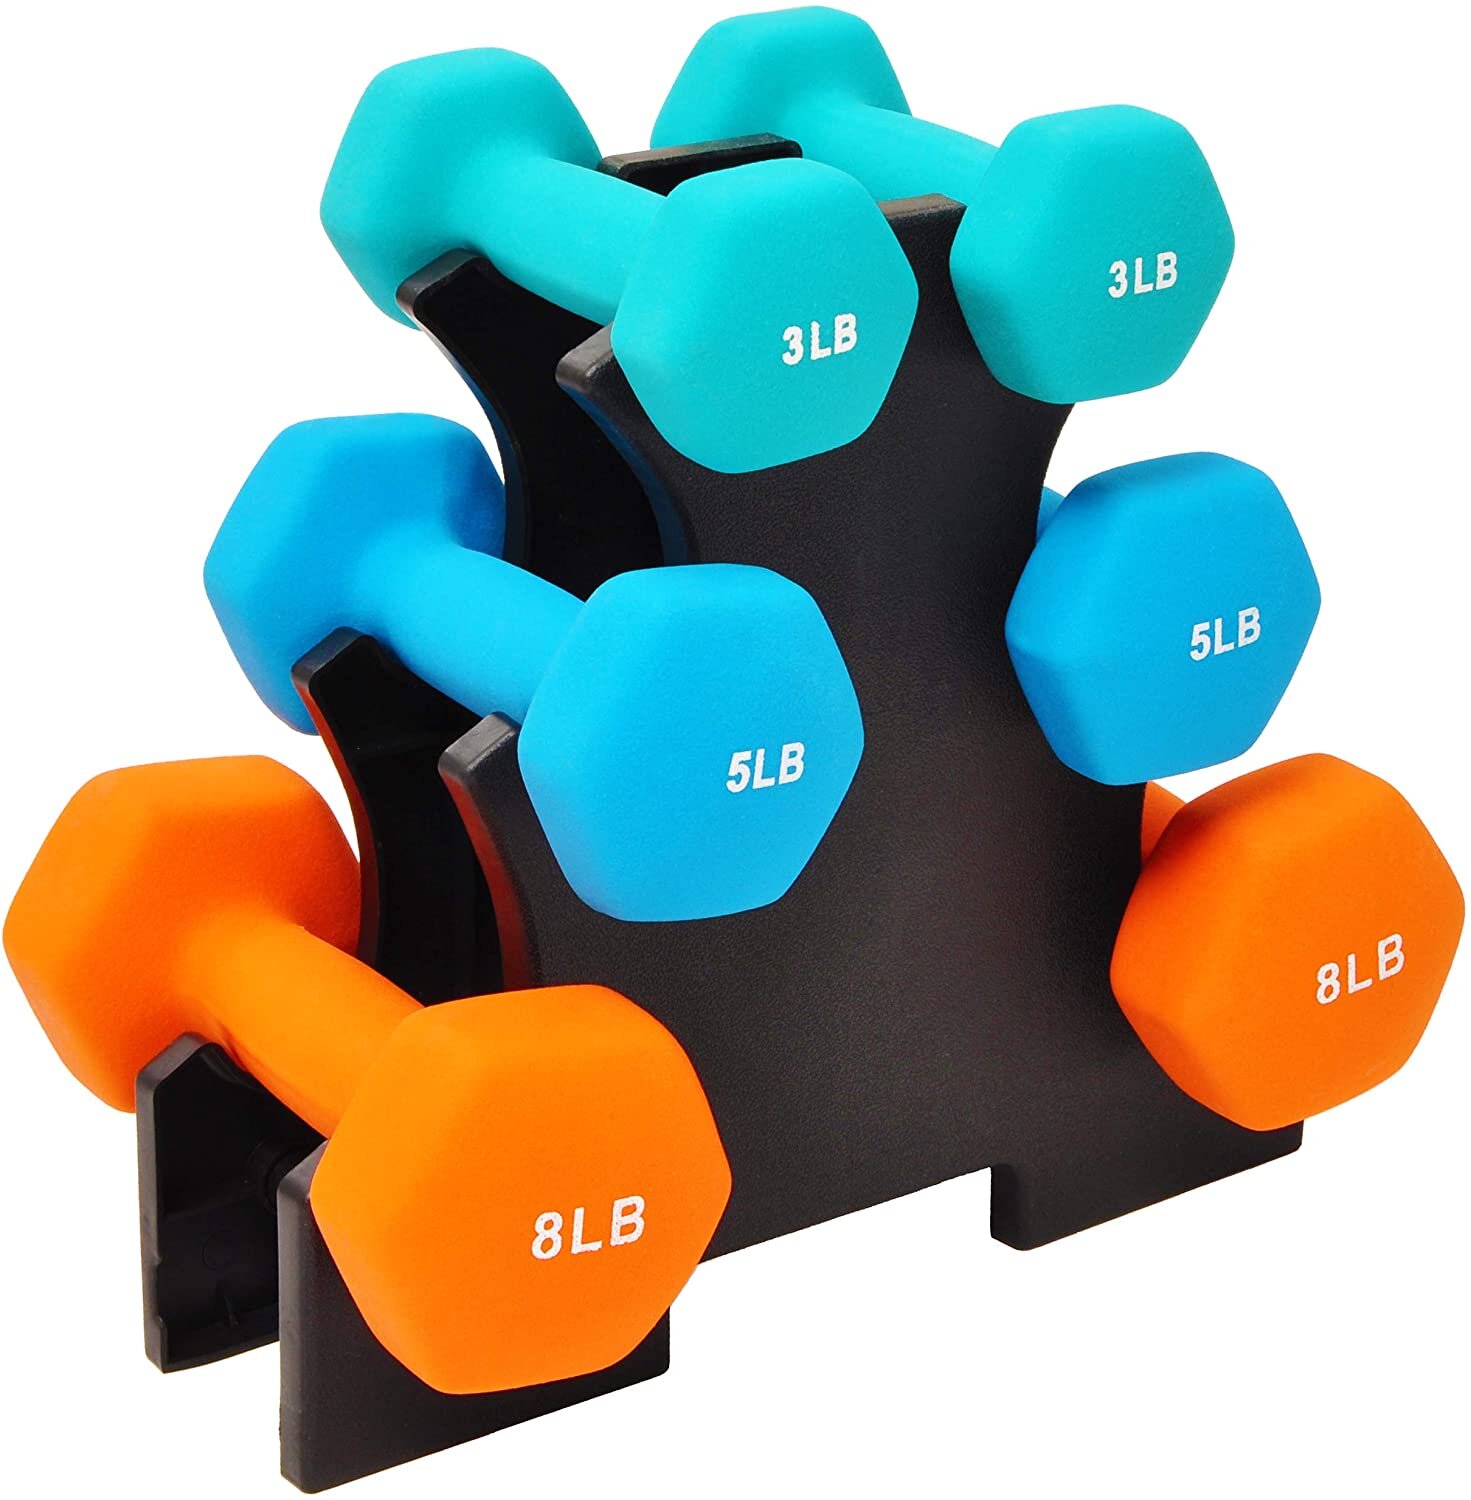 32 lb hand weight set with stand